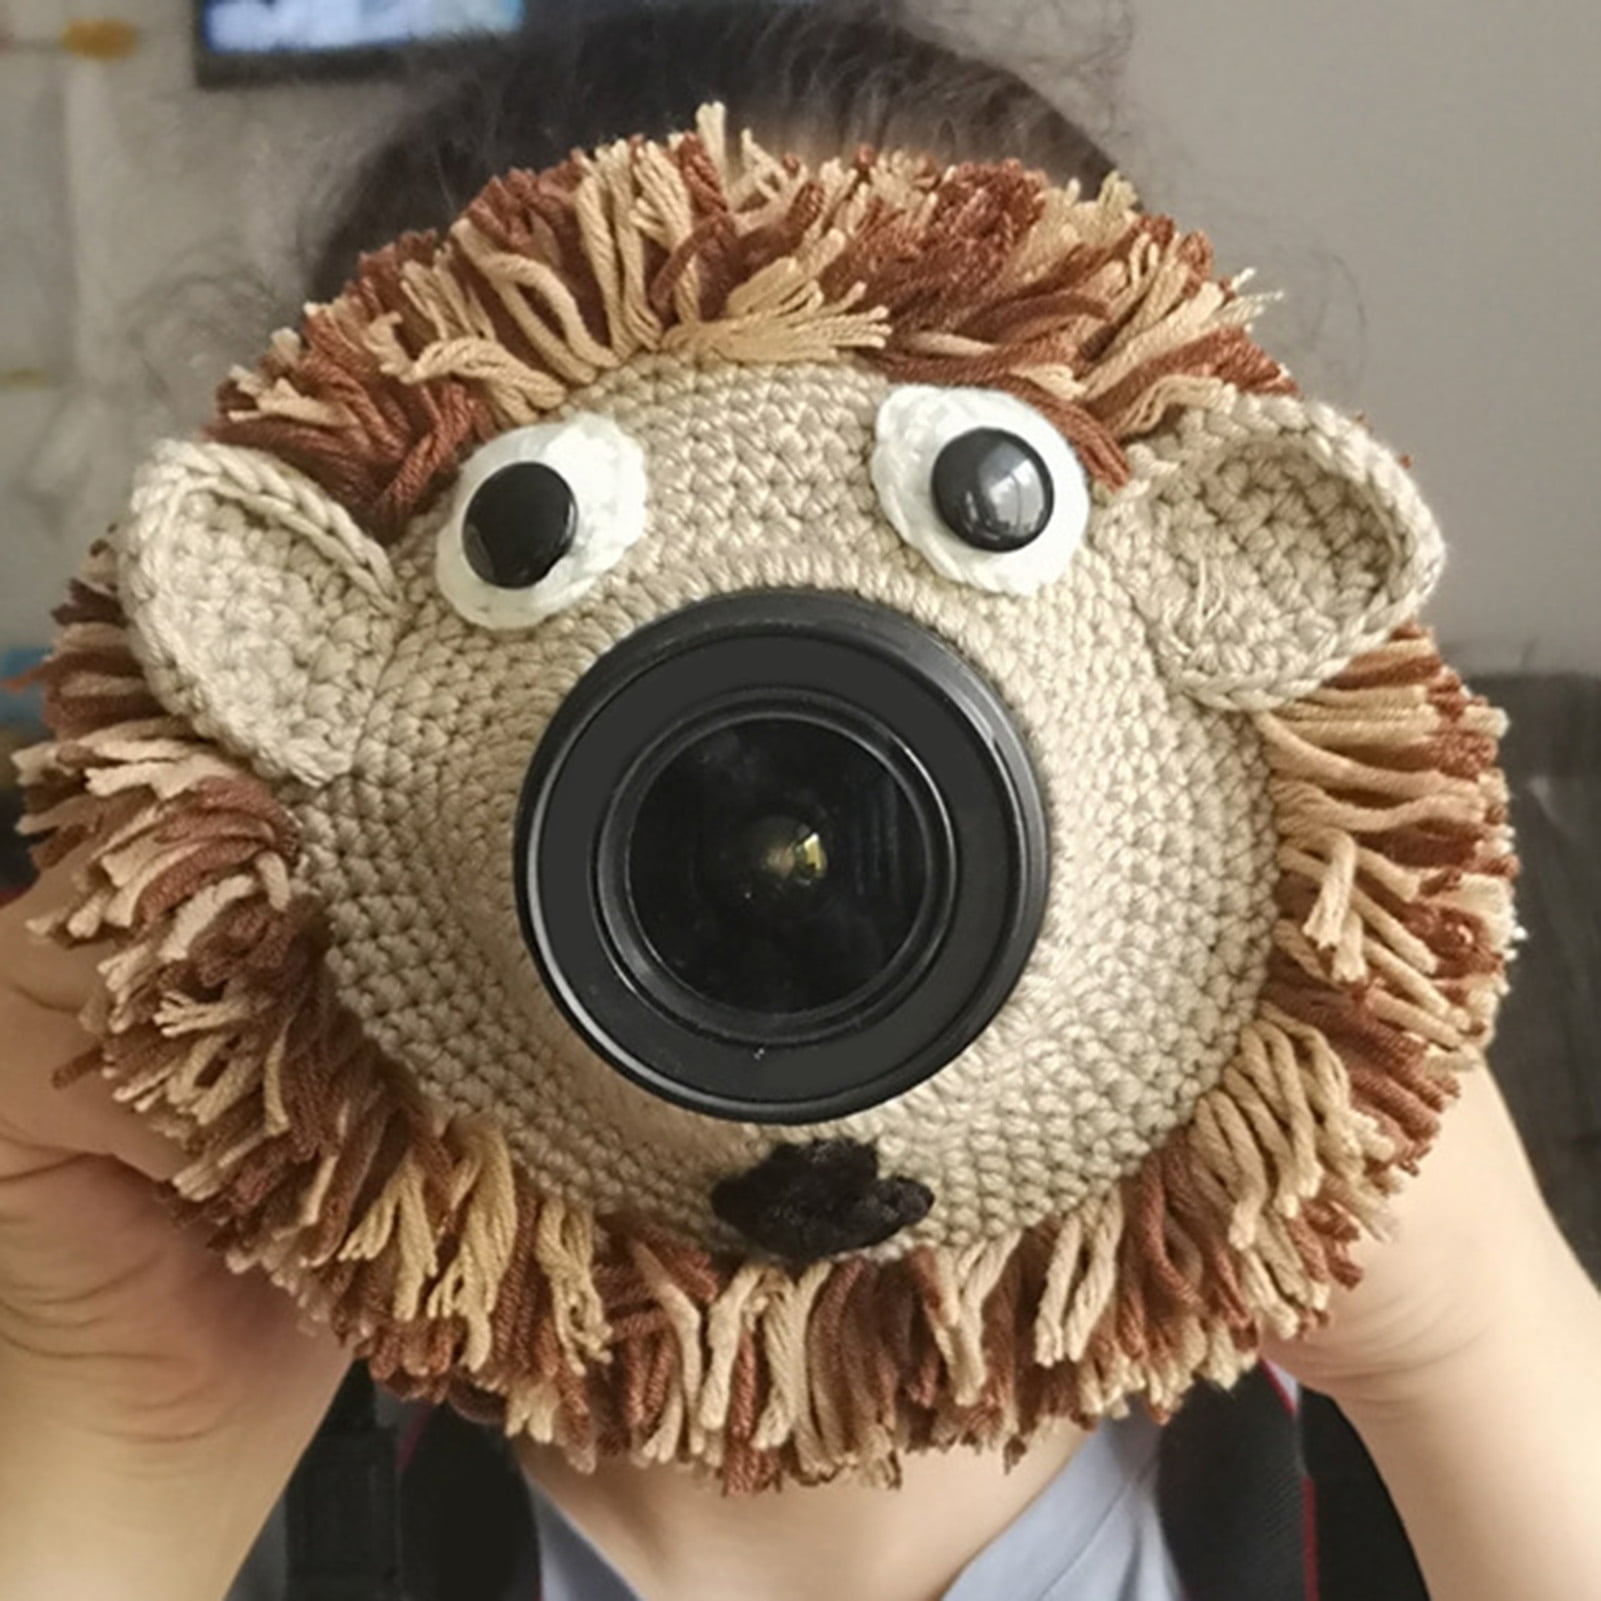 Travelwant Shutter Huggers,Animal Shutter Hugger,Stuffed Animal,Cute Animal  Lens Accessory Teaser Toy,Photography Props, Camera Buddies Posing Prop for  Portable Video Devices 